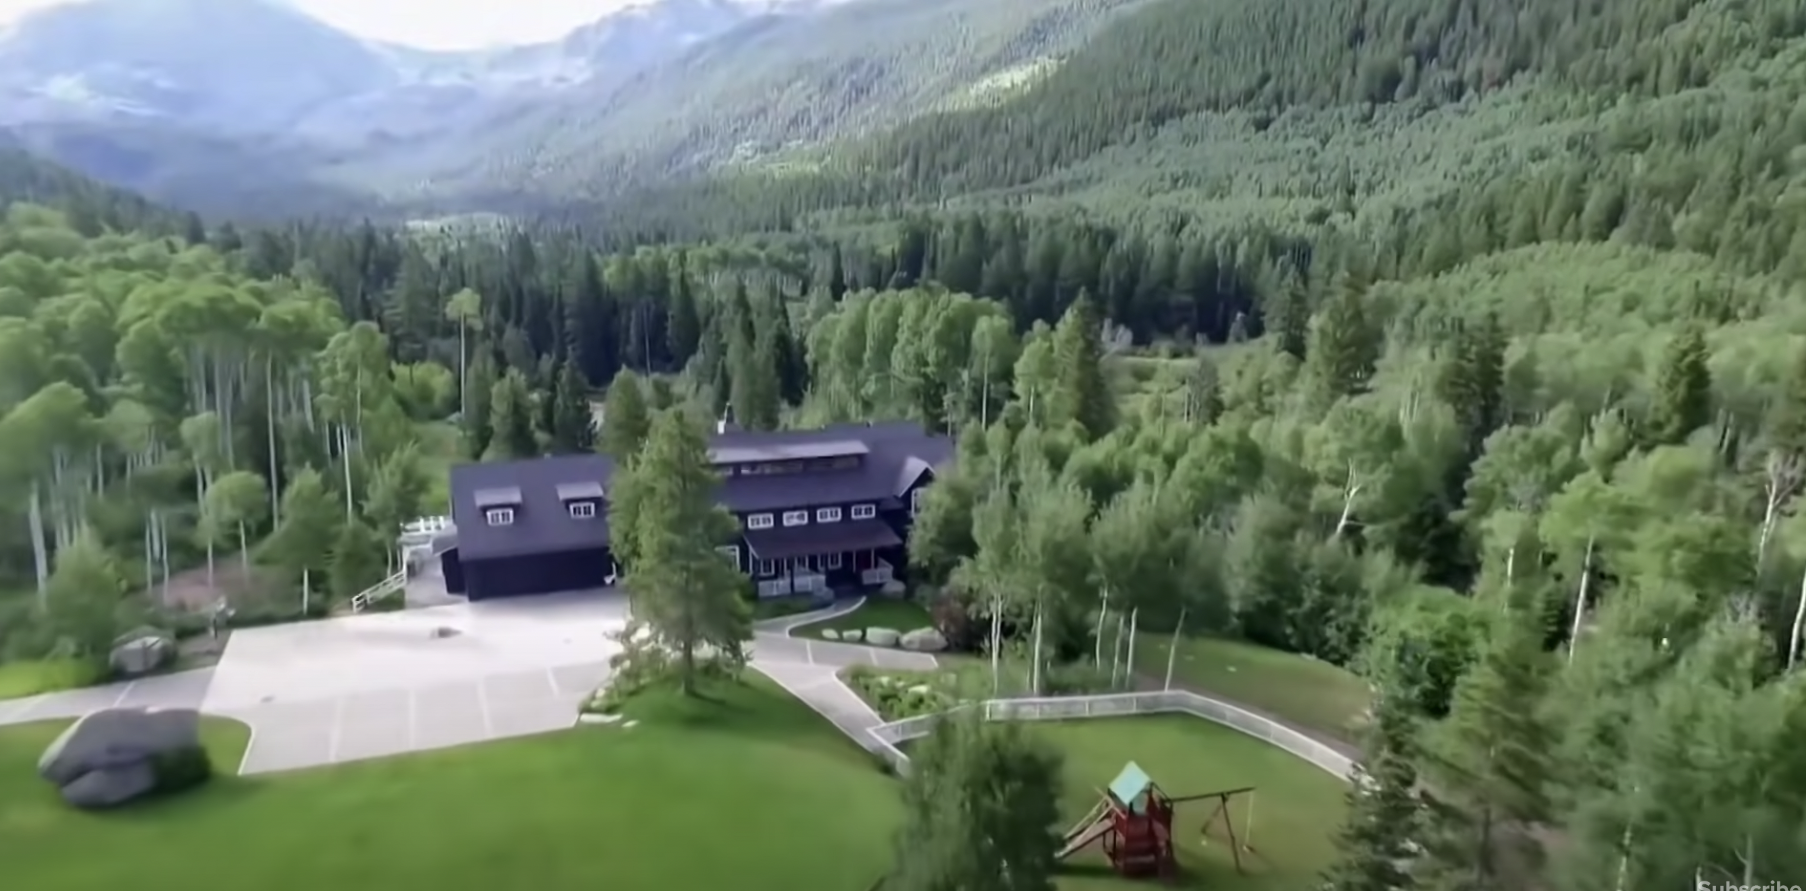 Kevin Costner's Aspen estate, as shown in a YouTube video | Source: youtube.com/@CNBCMakeIt